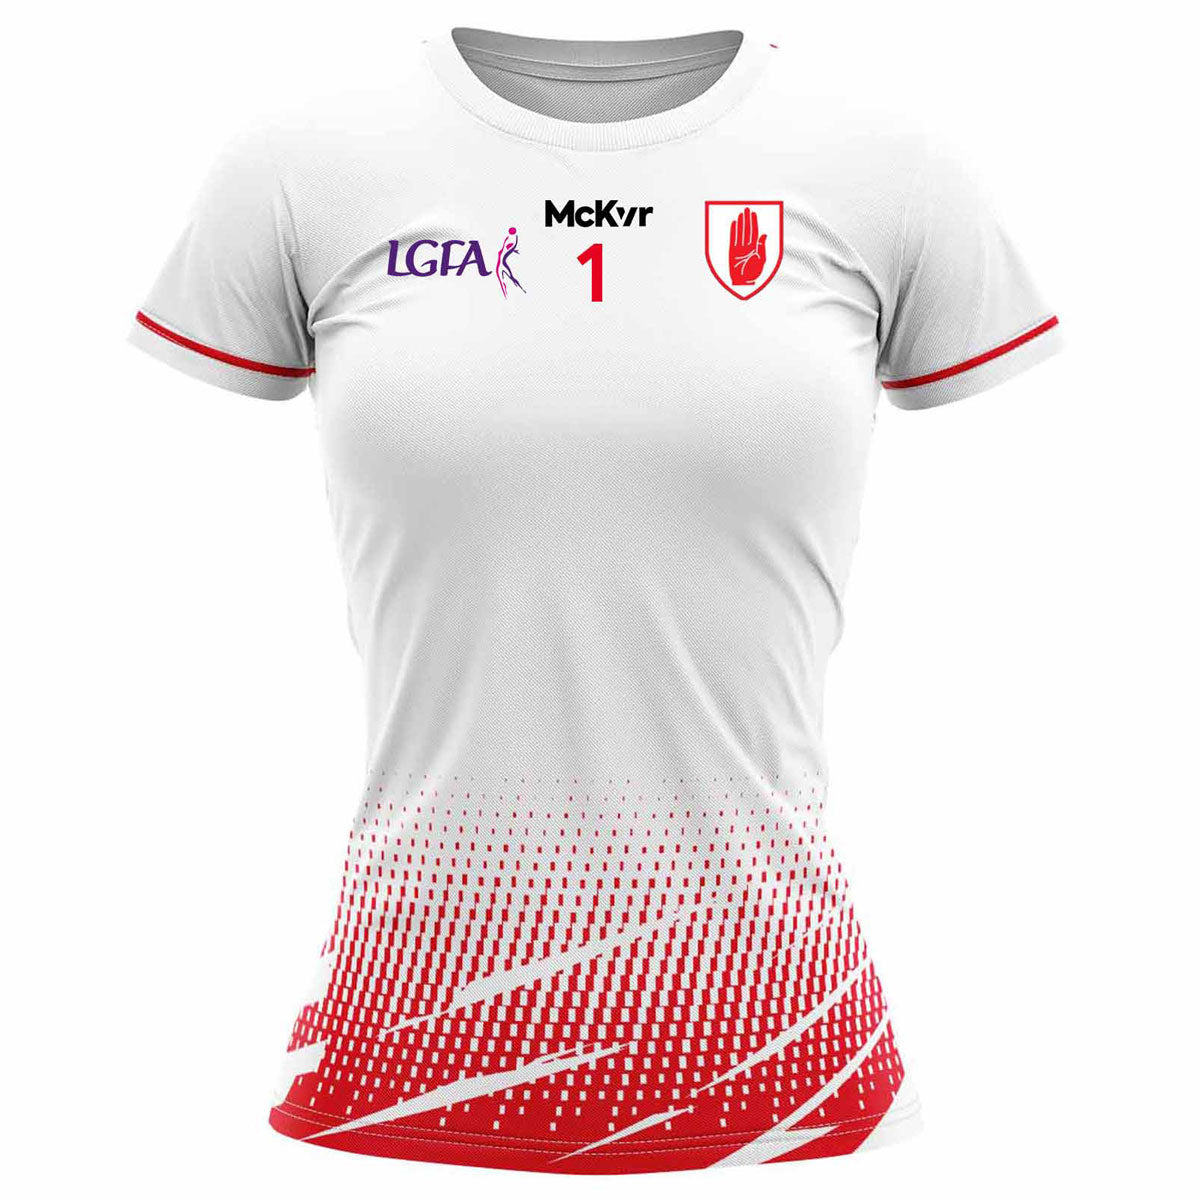 Mc Keever Kildallan LGFA Numbered Goalkeeper Jersey - Youth - White/Red